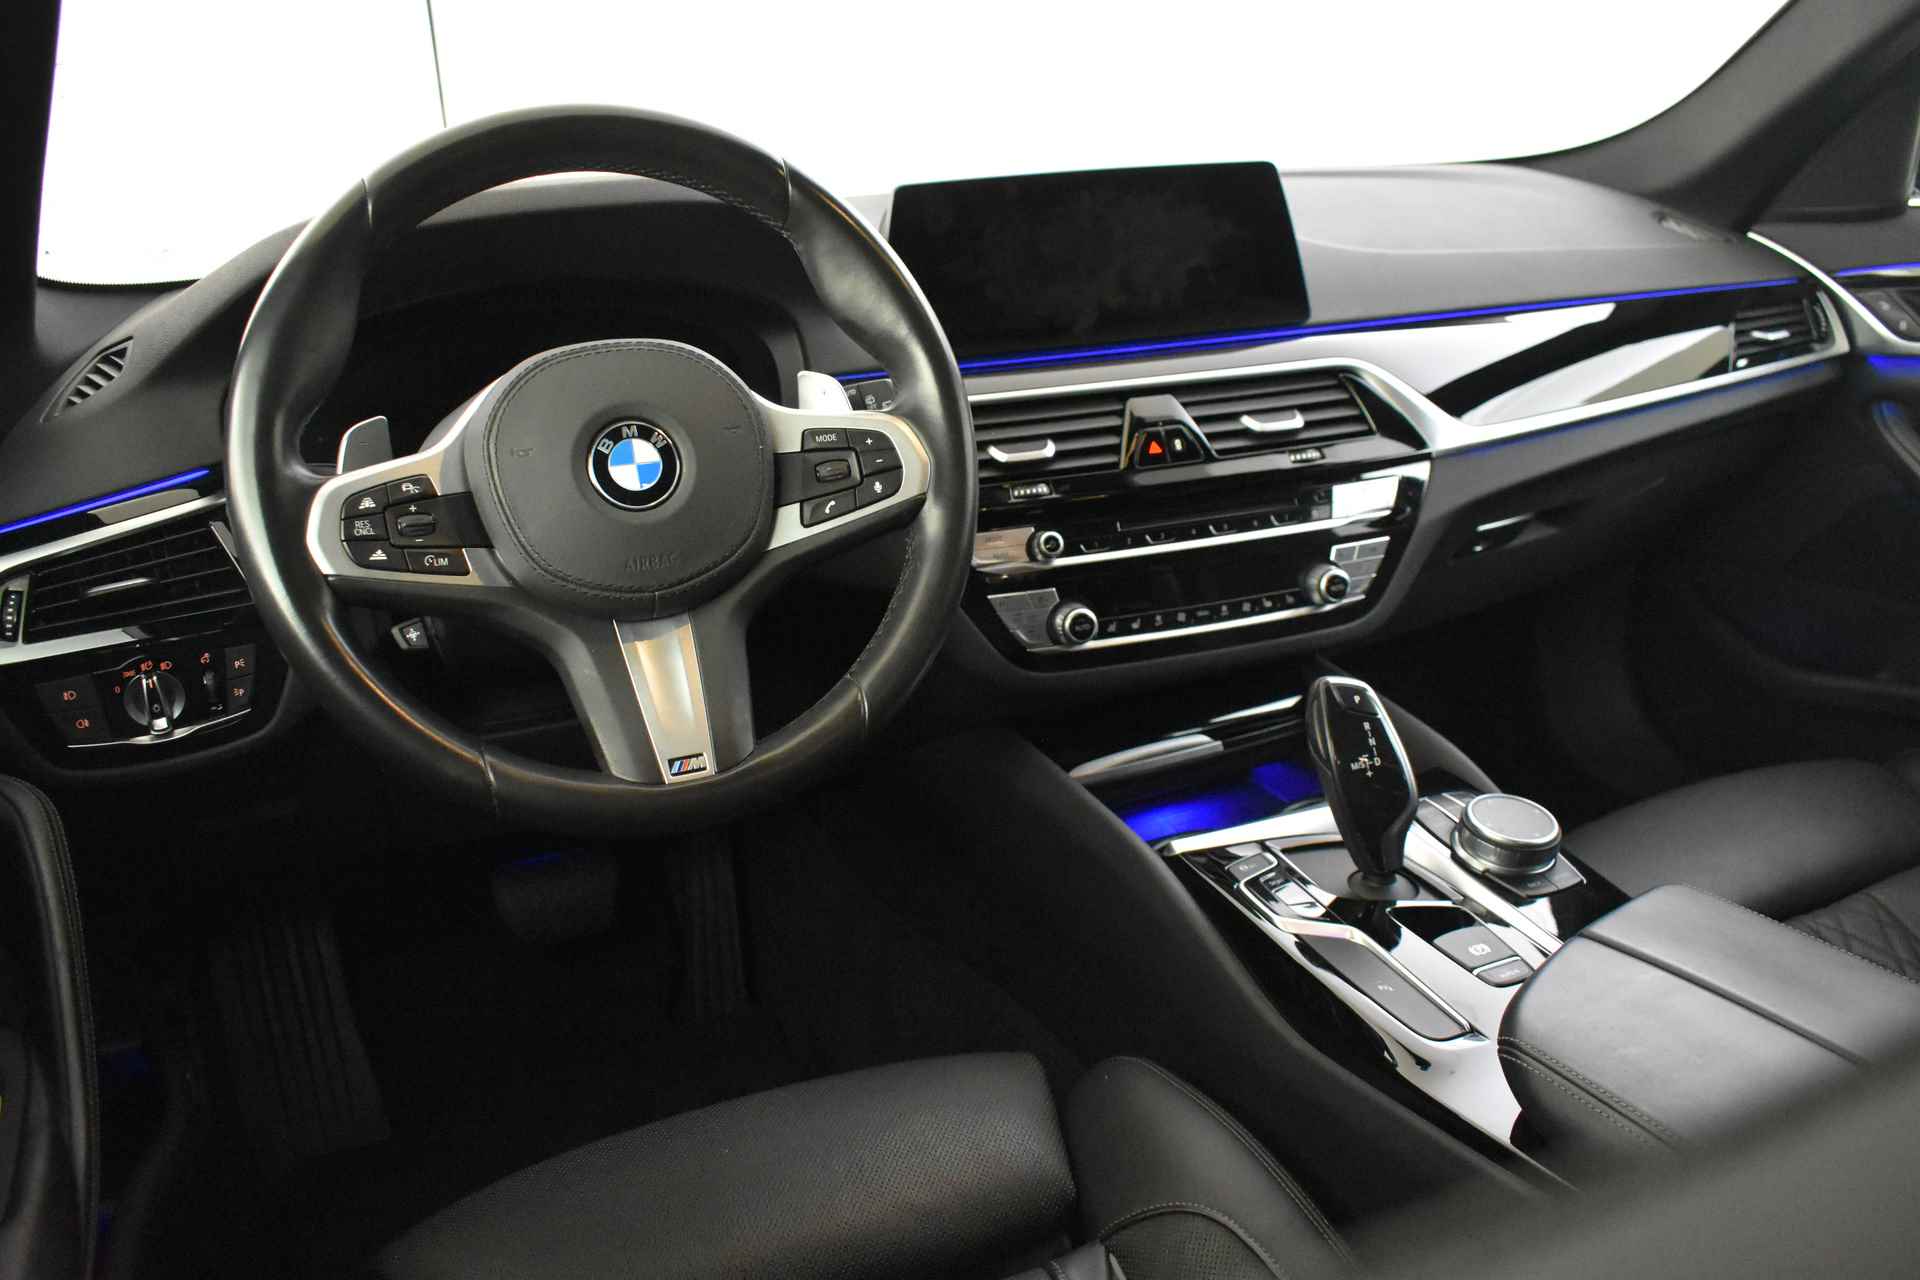 BMW 5 Serie Touring 520i High Executive Sport Line Shadow Line / Adaptieve LED / Active Cruise Control / Stoelventilatie / Head-Up / Parking Assistant / Navigatie Professional - 11/41